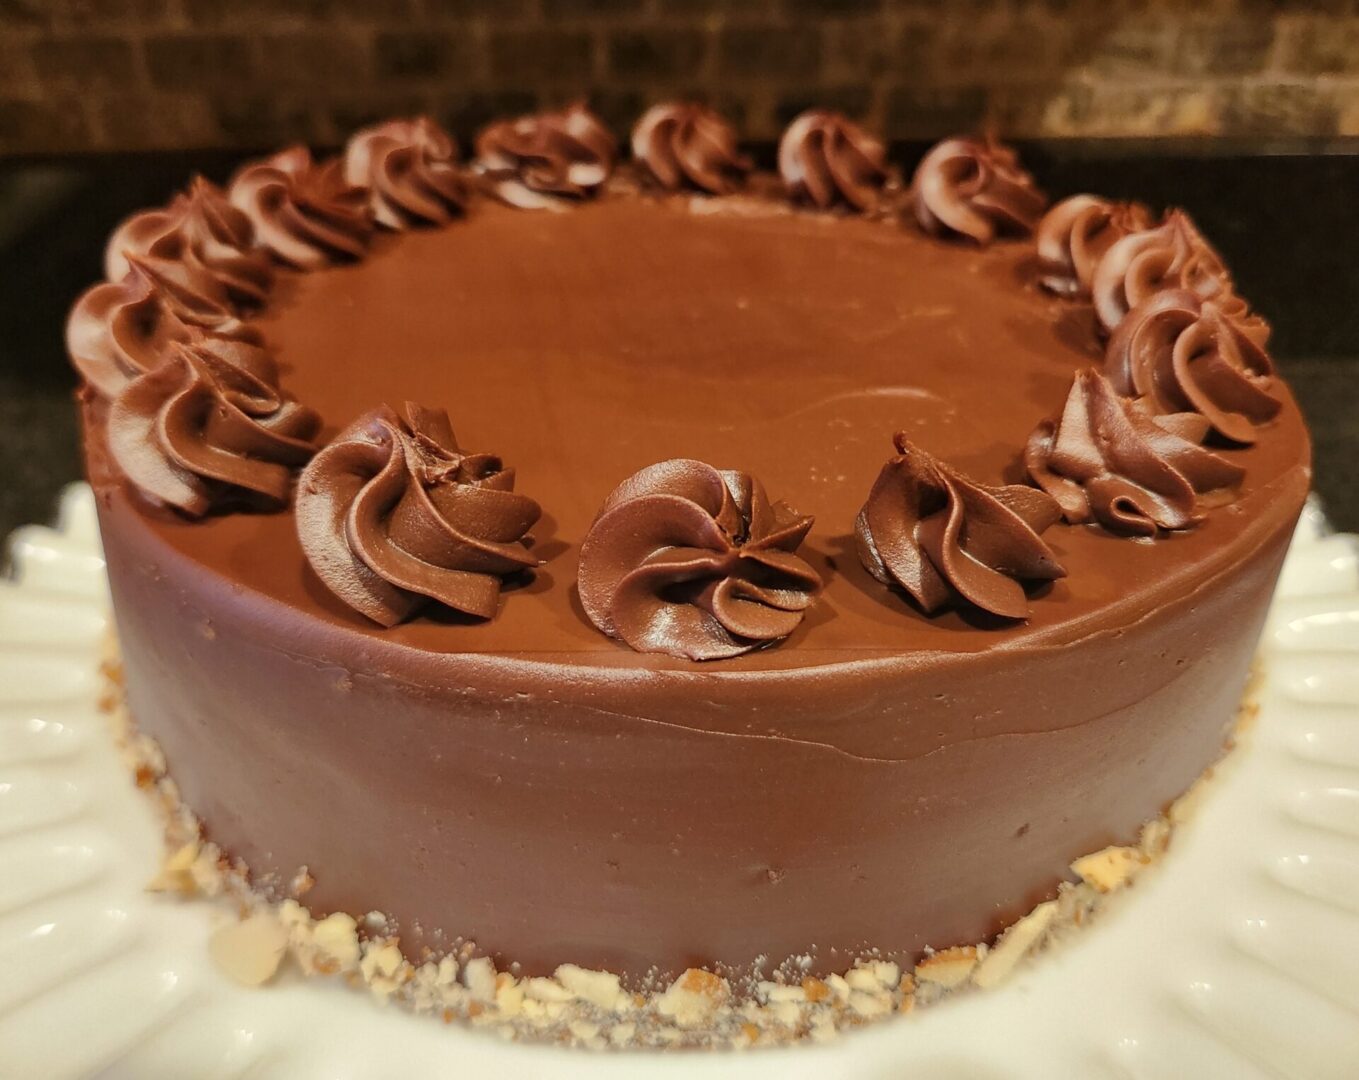 Chocolate cake with swirled frosting rosettes on top, displayed on a white plate as part of The Friday Baking Project, featuring a crumbly base.